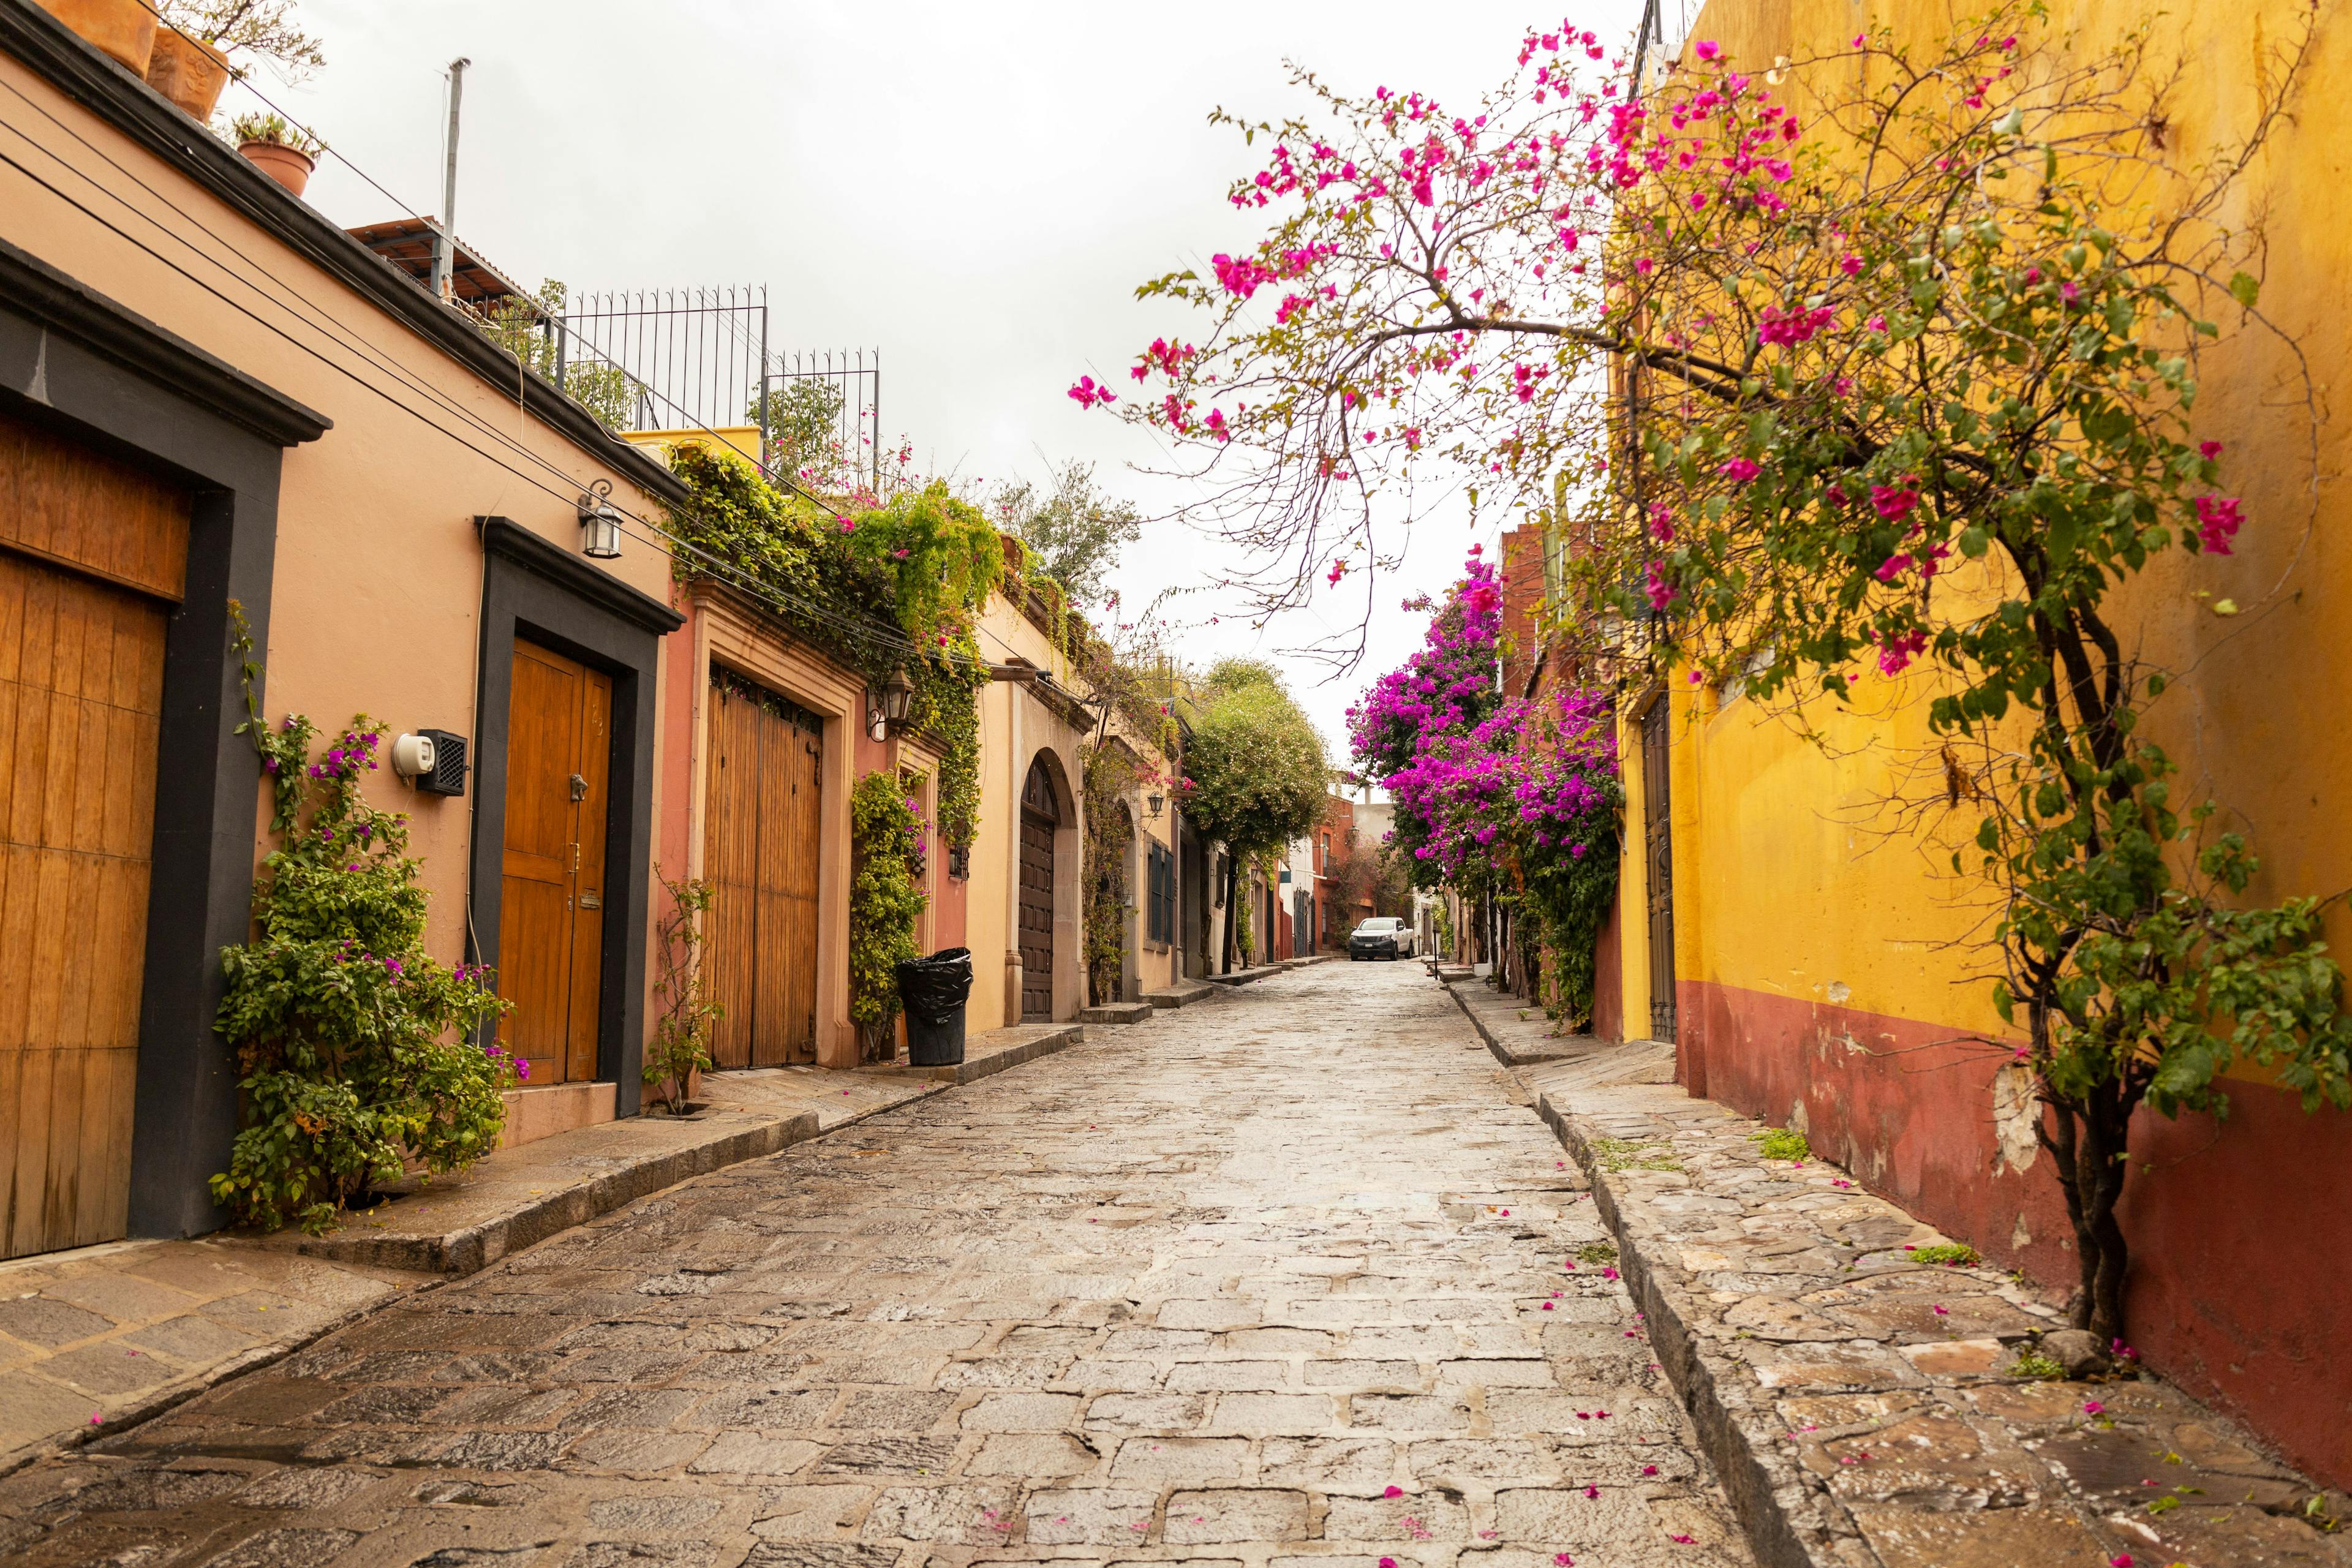 4 Best Cities for Digital Nomads in Mexico